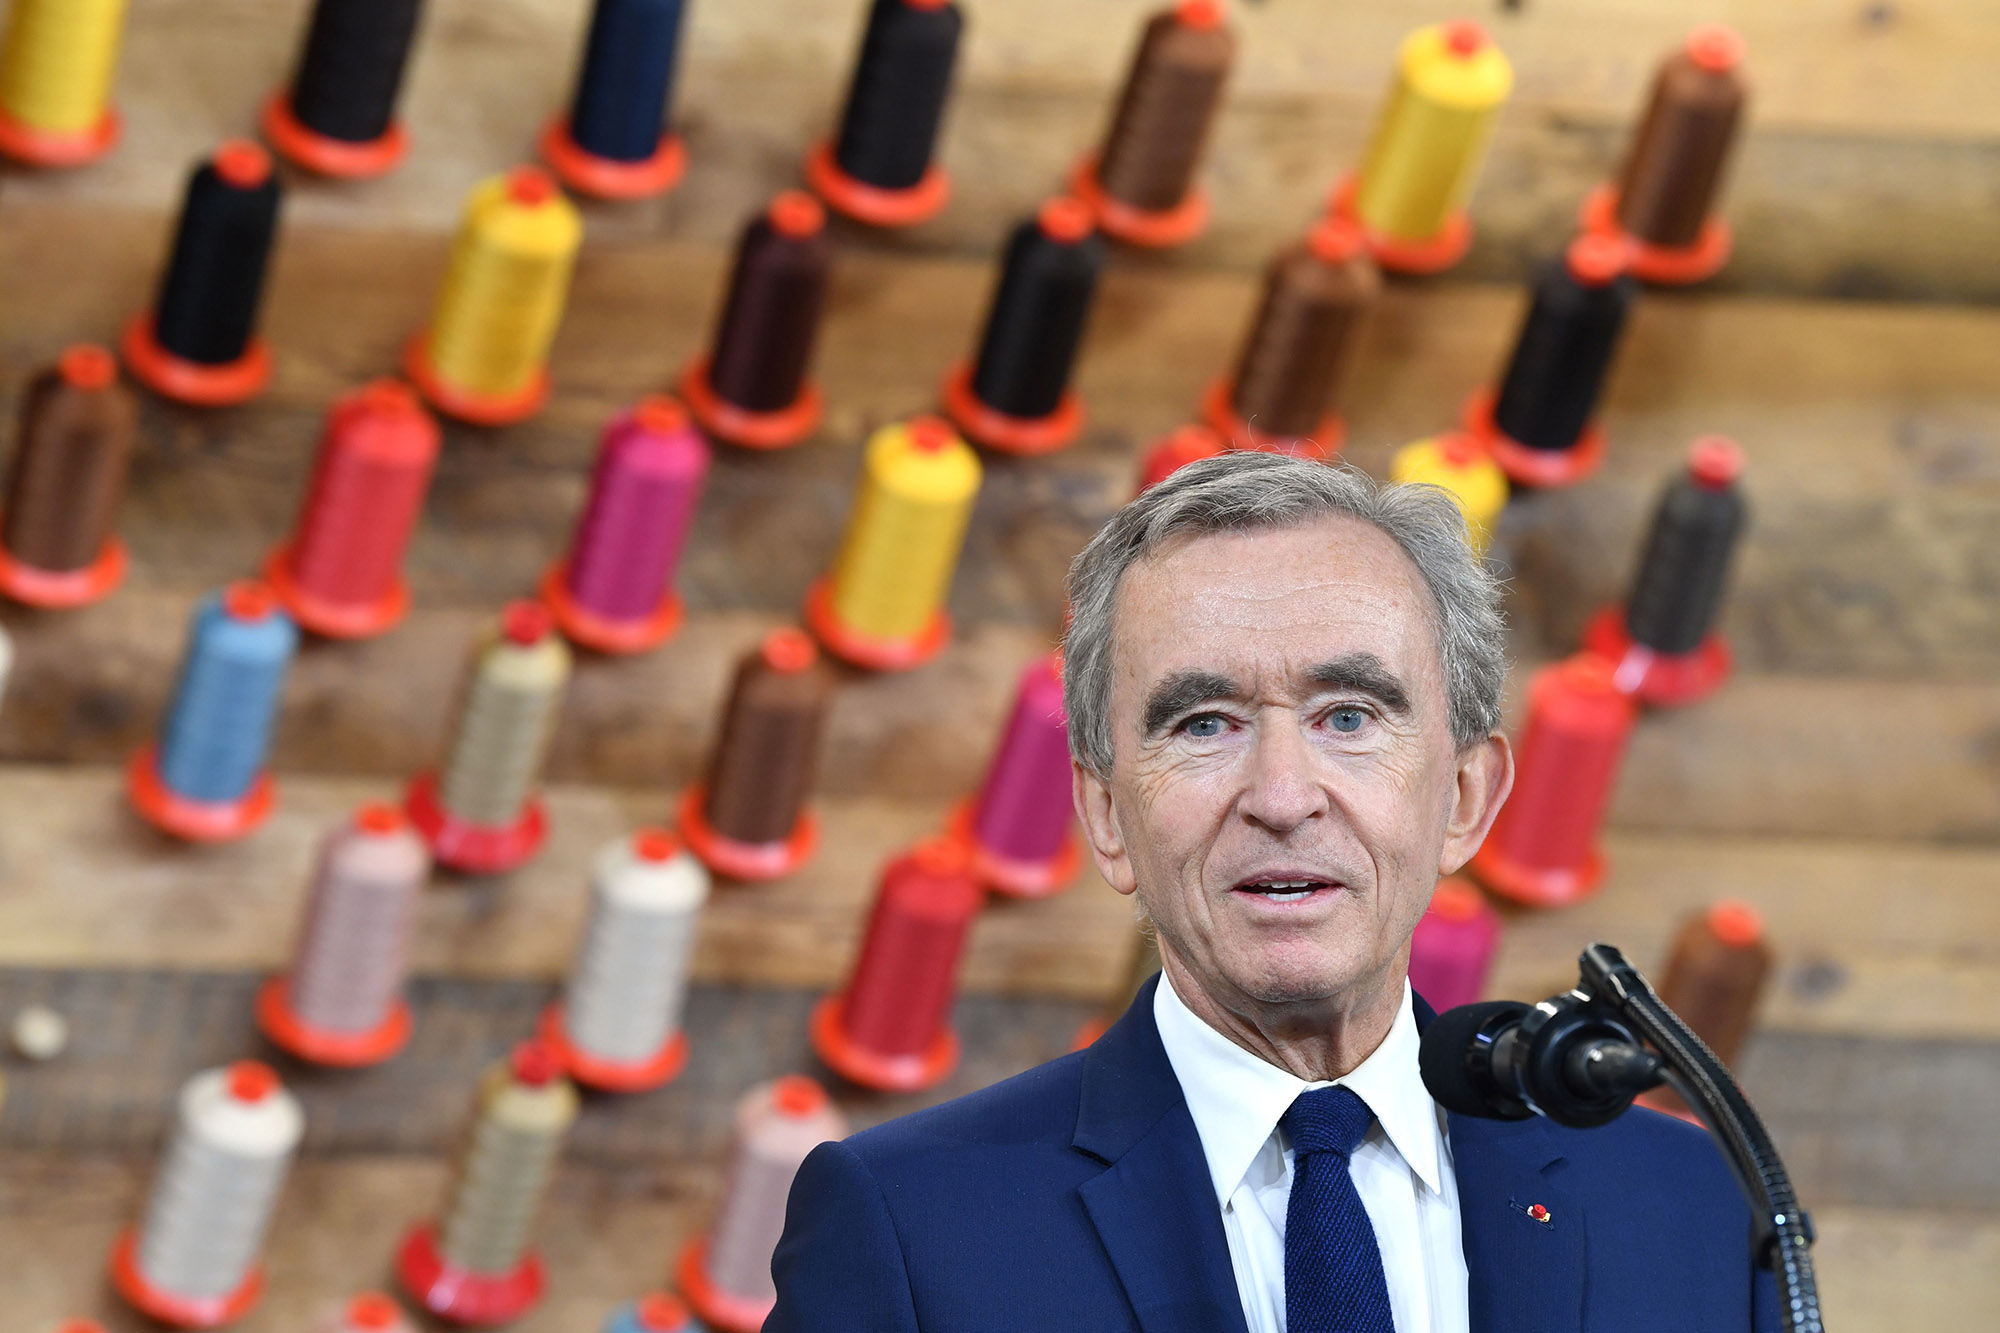 How Bernard Arnault's Net Worth Has Fluctuated Over the Years